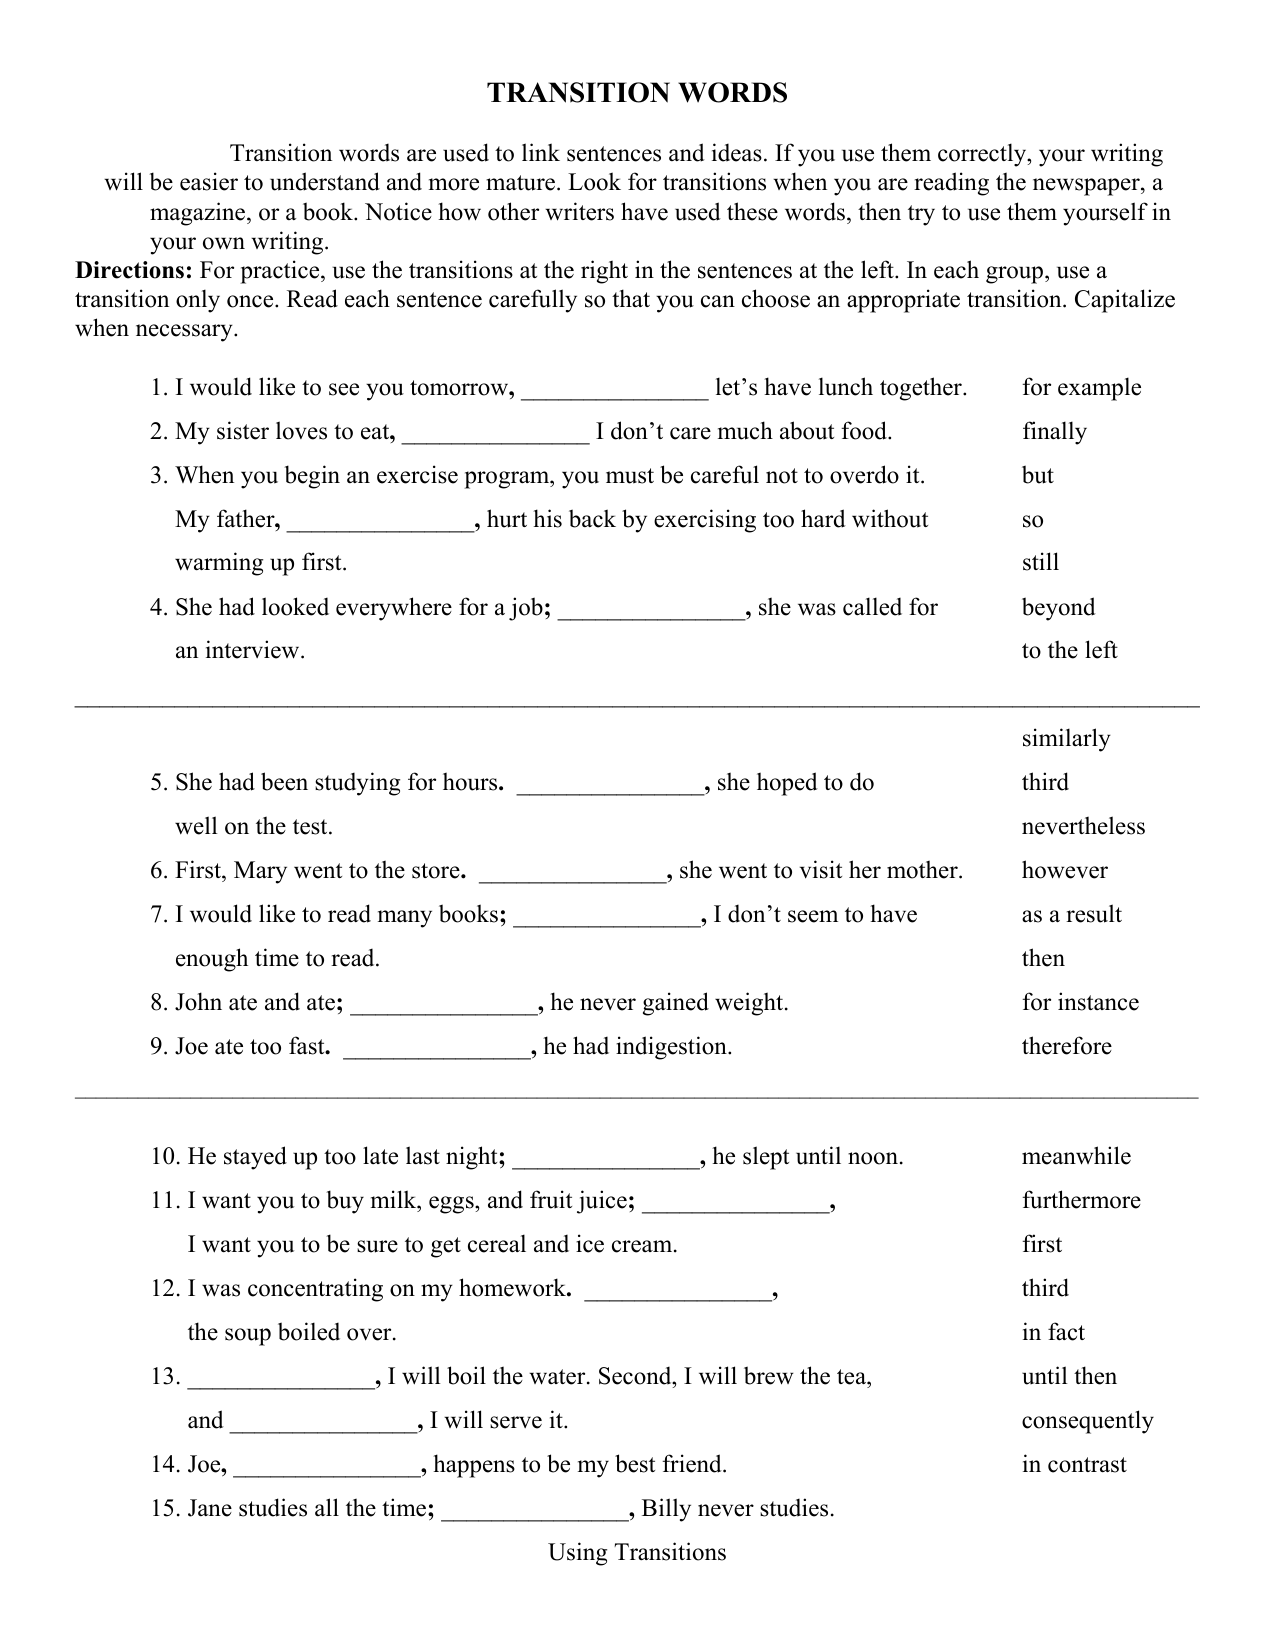 transition-words-complete-the-sentence-writing-worksheet-riset